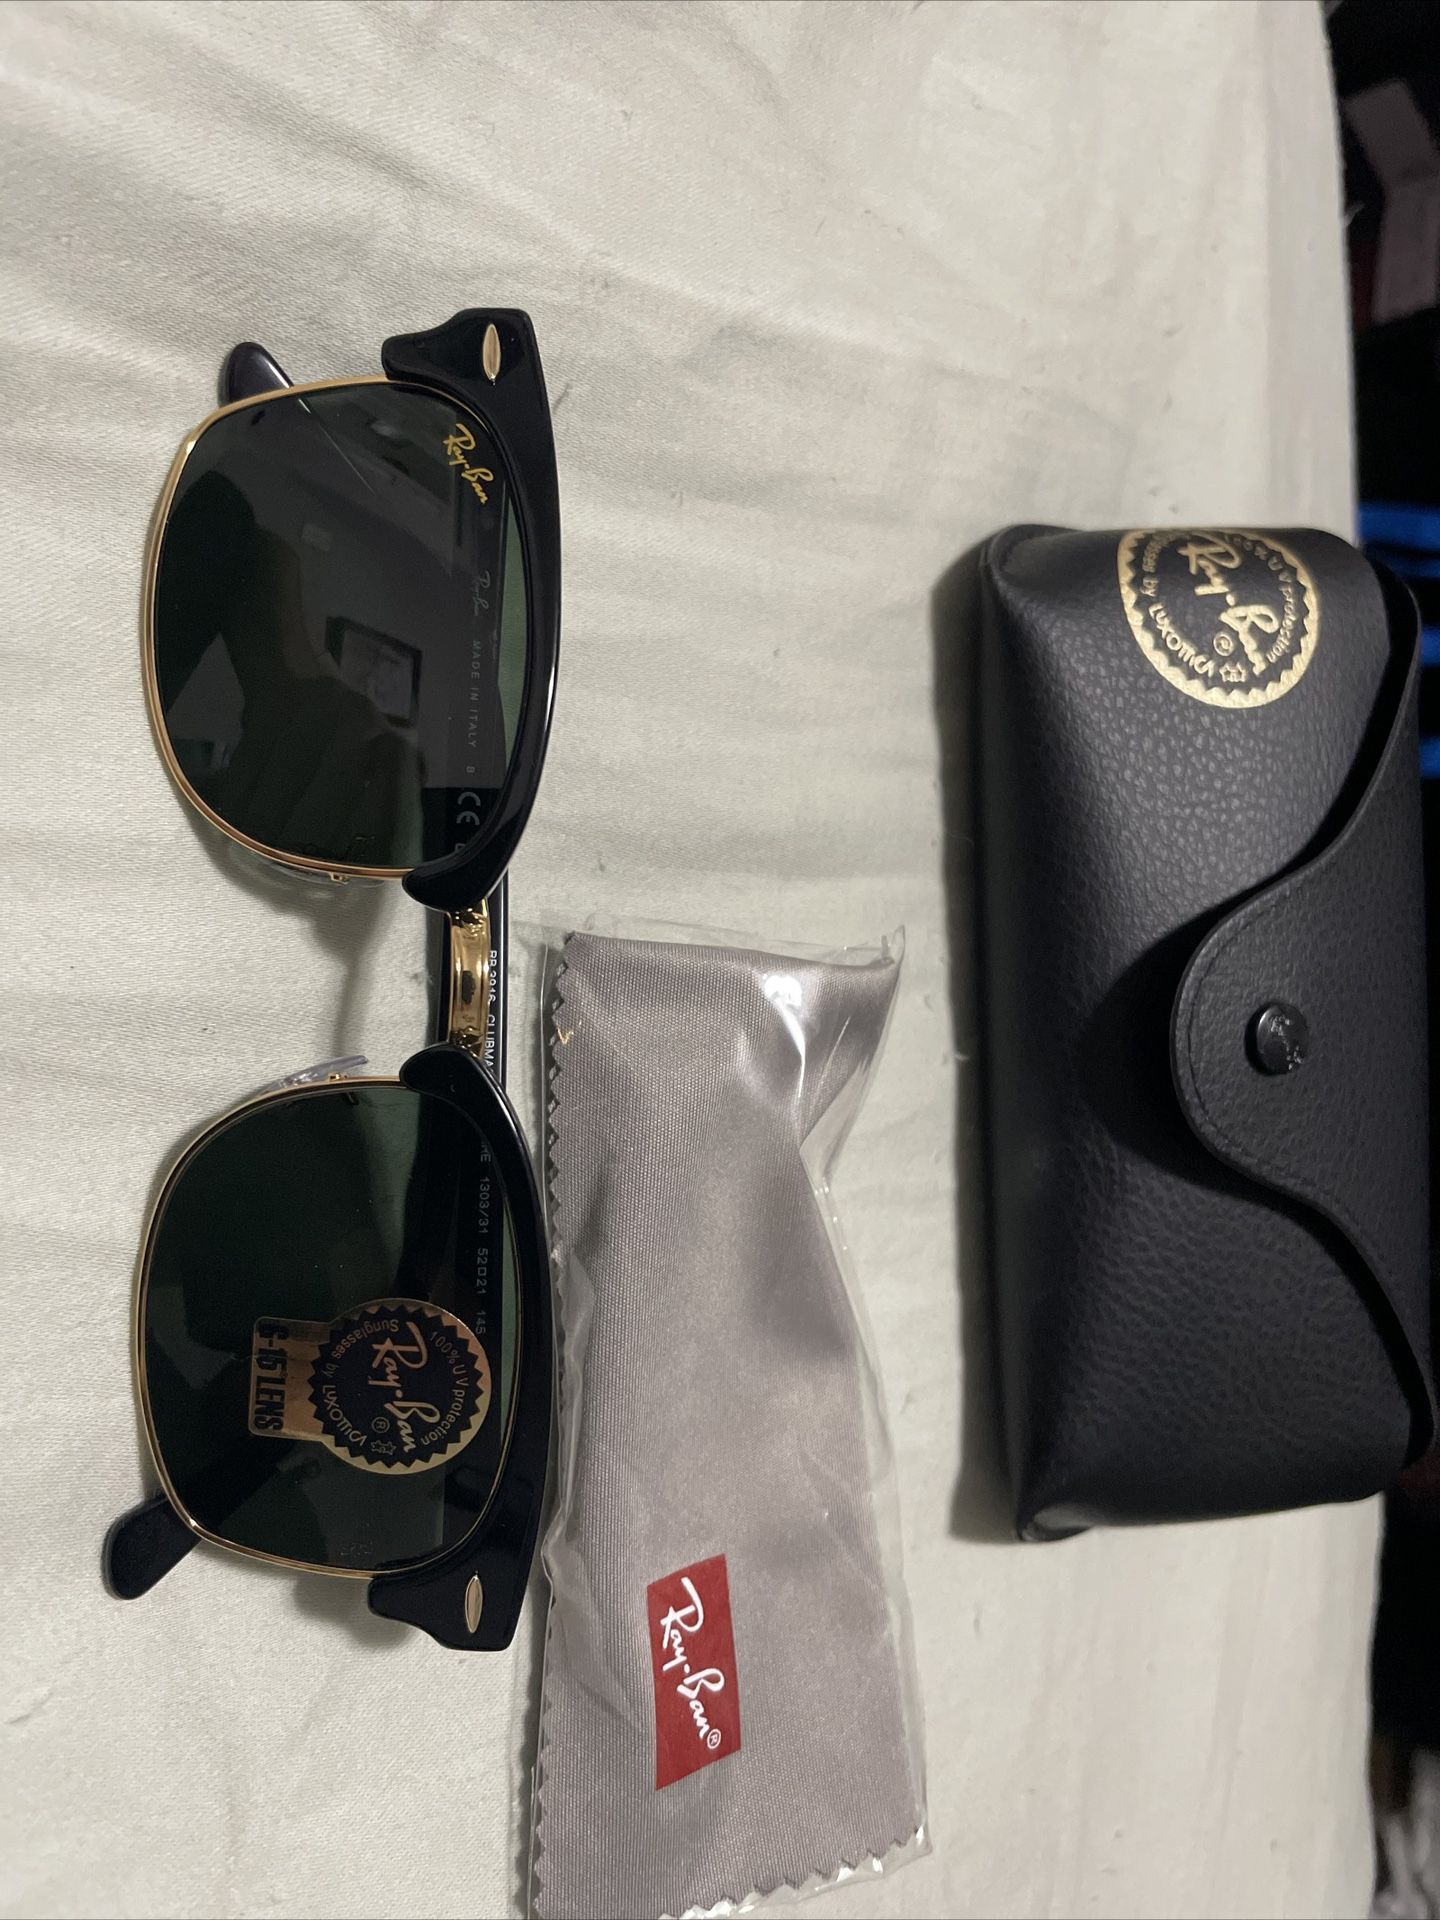 Ray Ban Clubman’s RB3016 Brand New (discontinued Frame)